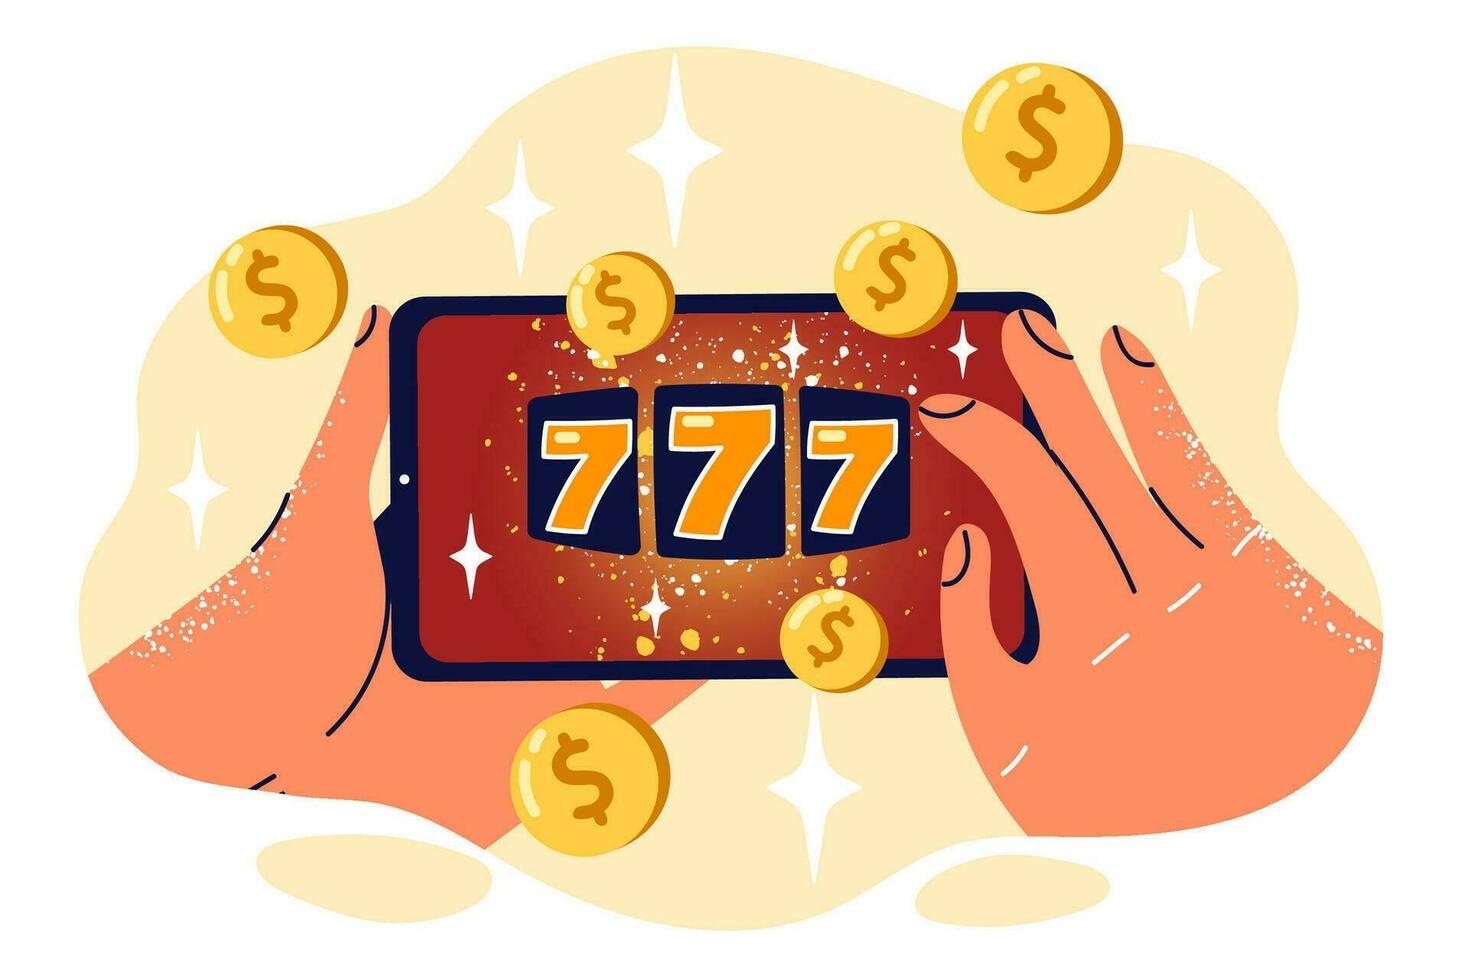 Slot machine in phone in hands of person, for advertising online casino and gambling with cash prize. Mobile casino application with 777 numbers in smartphone to test your luck in lottery jackpot draw vector